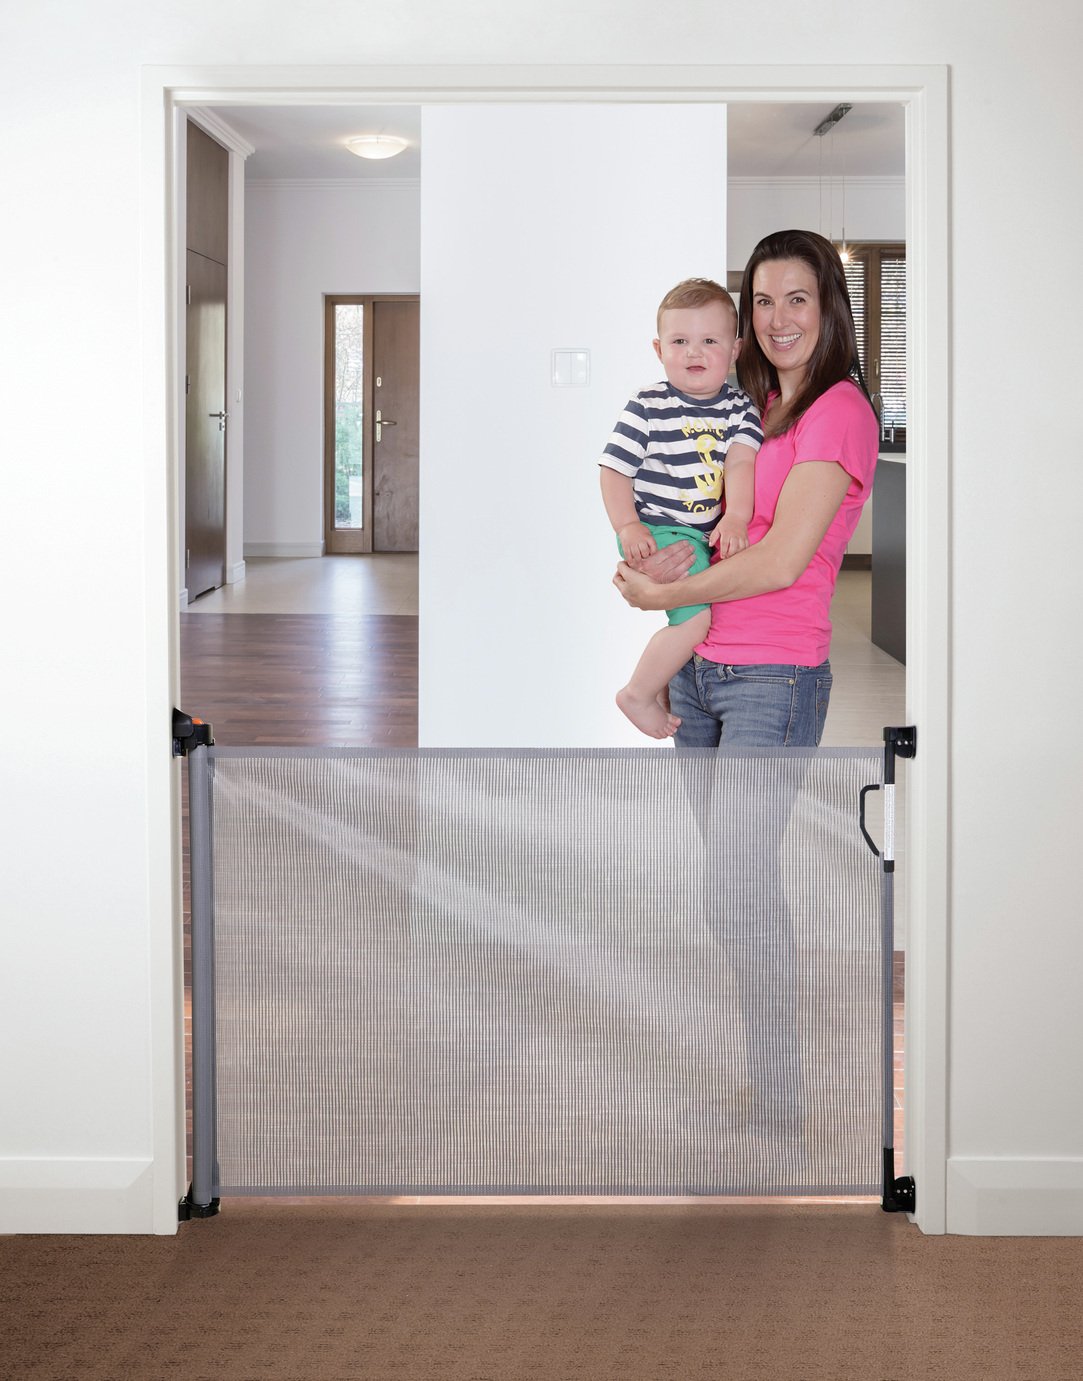 Dreambaby Retractable Gate Fits Gaps Up To 140Cms Review